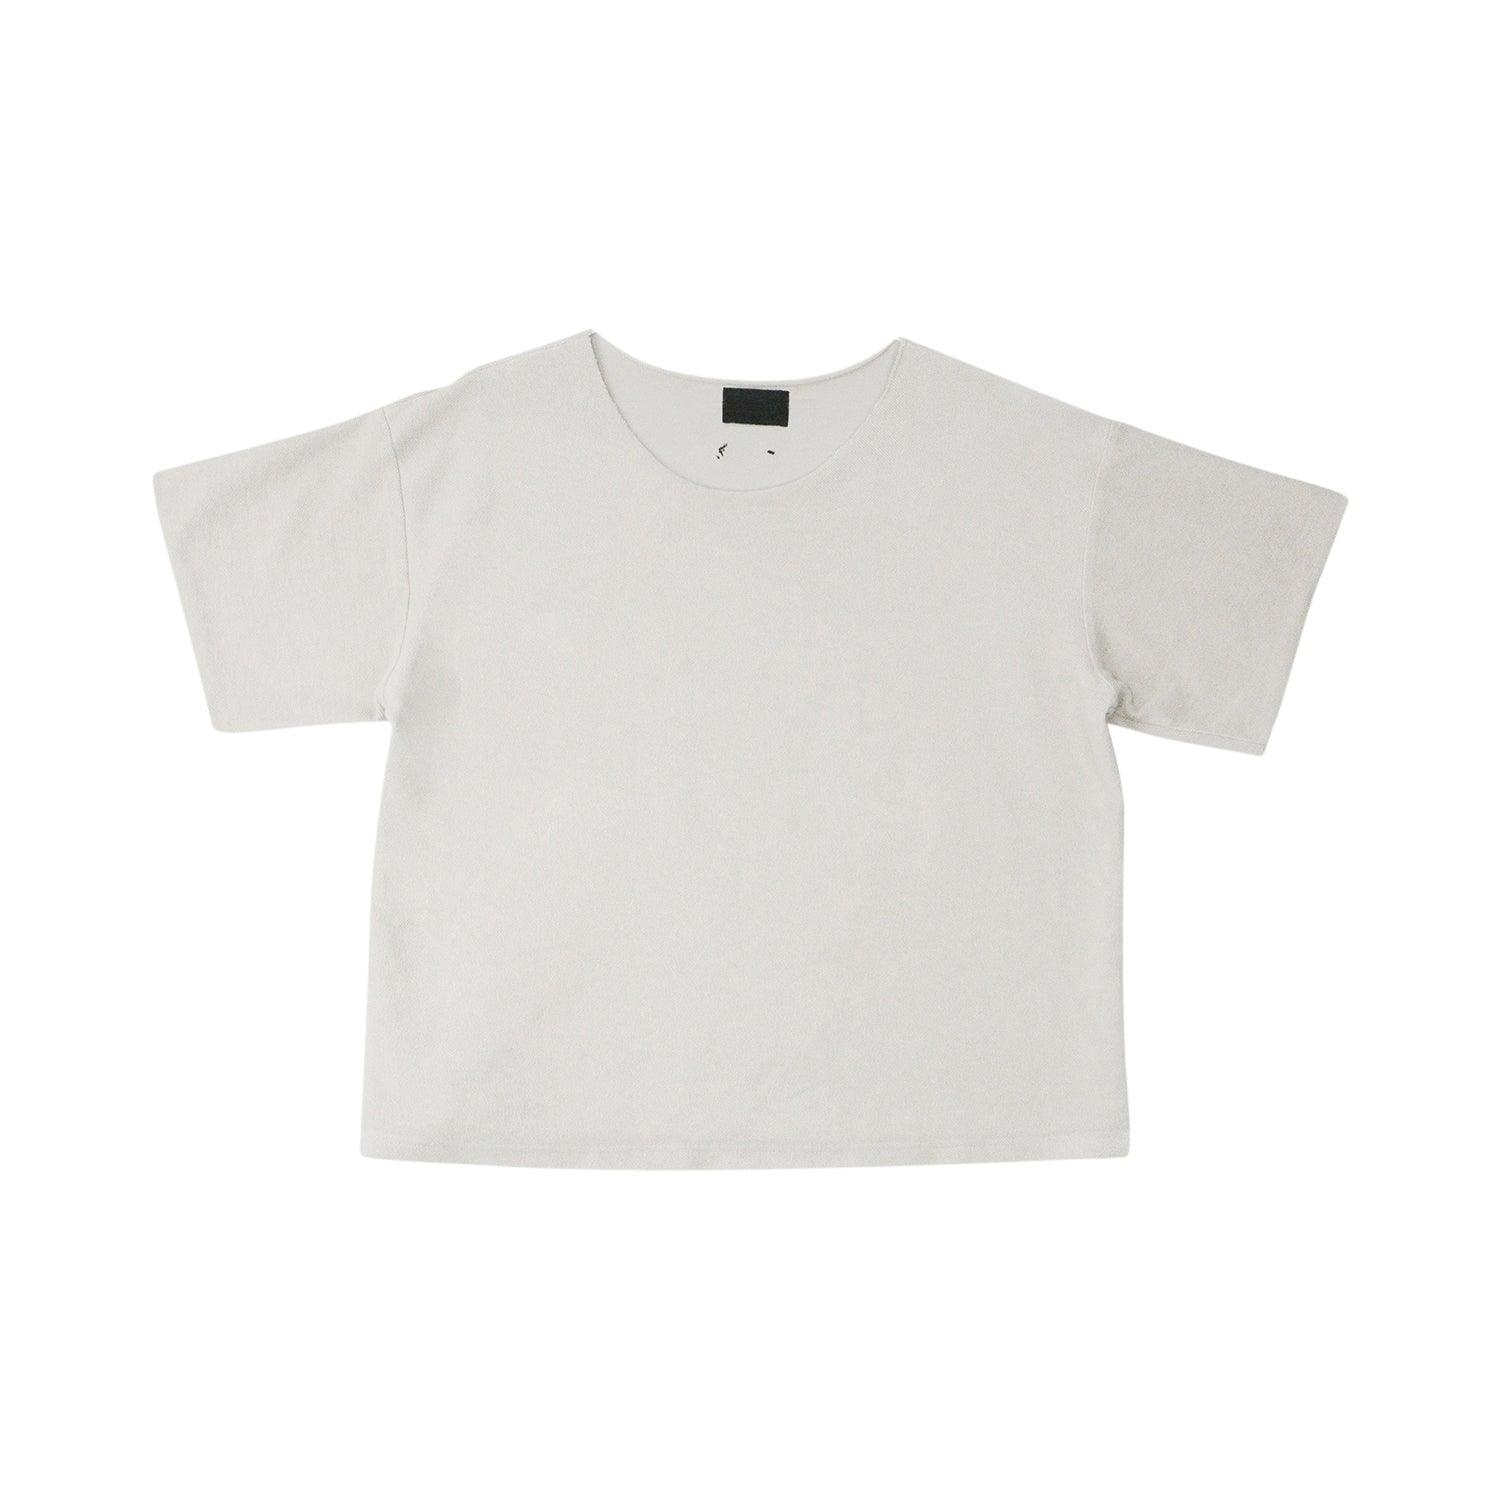 Fear Of God Shirt - Men's XL - Fashionably Yours